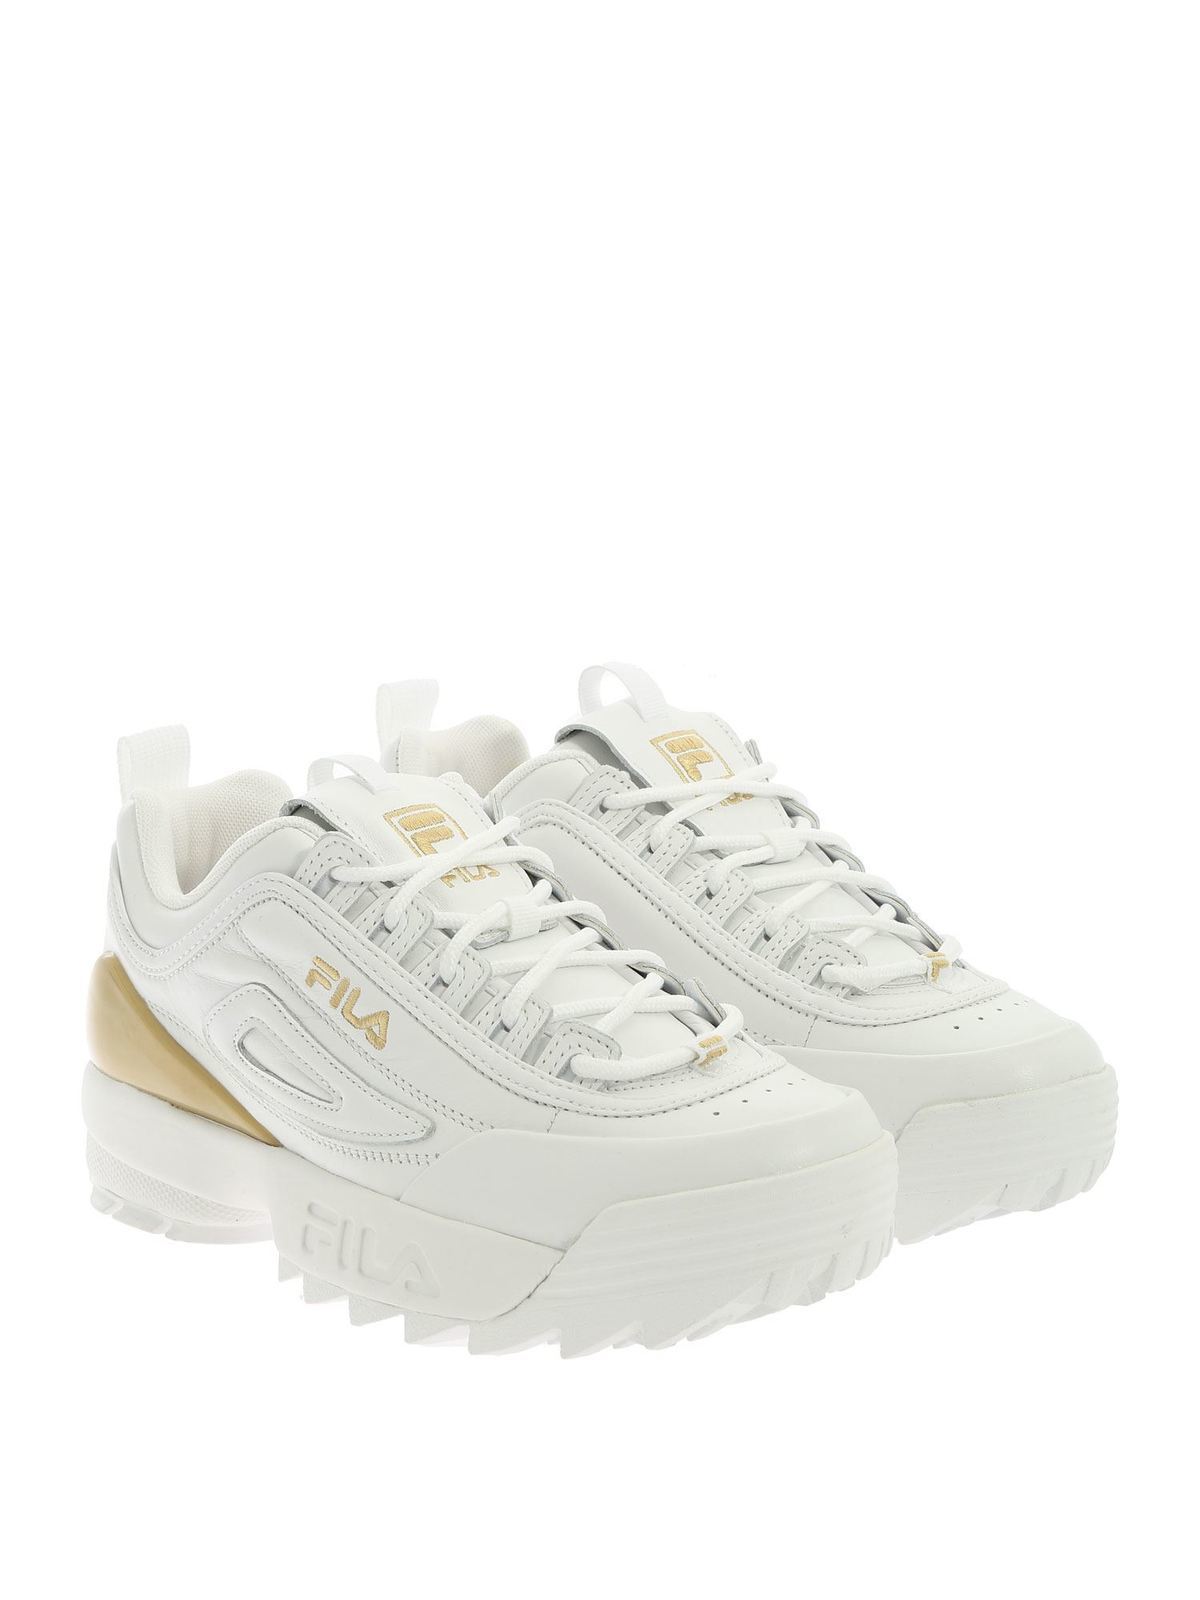 Trainers - Disruptor Premium sneakers in white and gold - 10108621FG